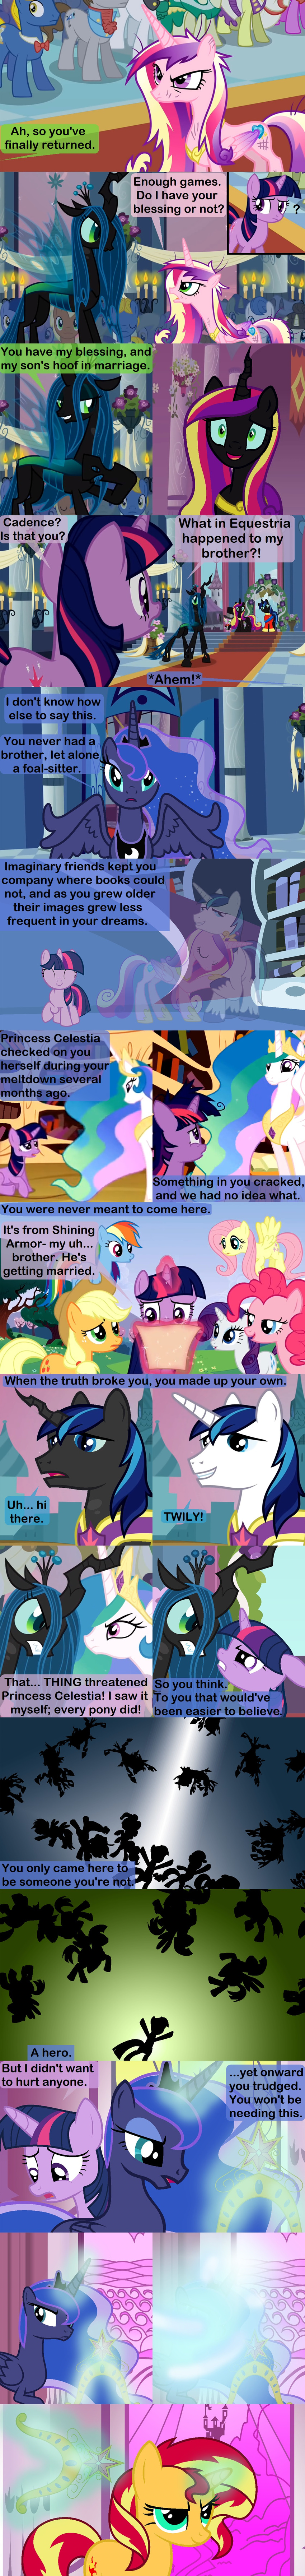 ? applejack_(mlp) armor beavernator blonde_hair blue_eyes blue_hair book bookshelf candle candlestick canterlot changeling clothing comic crown cutie_mark dialog dragon english_text equestria_girls equine fangs female fire fluttershy_(mlp) friendship_is_magic glowing gold grass green_eyes green_hair hair hat holes horn horse hug imaginary inside library long_hair ma;e magic mammal messy_hair multi-colored_hair my_little_pony necklace outside paper pink_hair pinkie_pie_(mlp) plot_twist pony princess_cadance_(mlp) princess_celestia_(mlp) princess_luna_(mlp) purple_hair queen_chrysalis_(mlp) rainbow_hair rarity_(mlp) red_hair royal_guard_(mlp) sharp_teeth shining_armor_(mlp) silhouette slit_pupils sparkles spike_(mlp) straight_hair sunset_shimmer_(eg) teeth text top_hat tree two_tone_hair unicorn uniform window winged_unicorn wings young